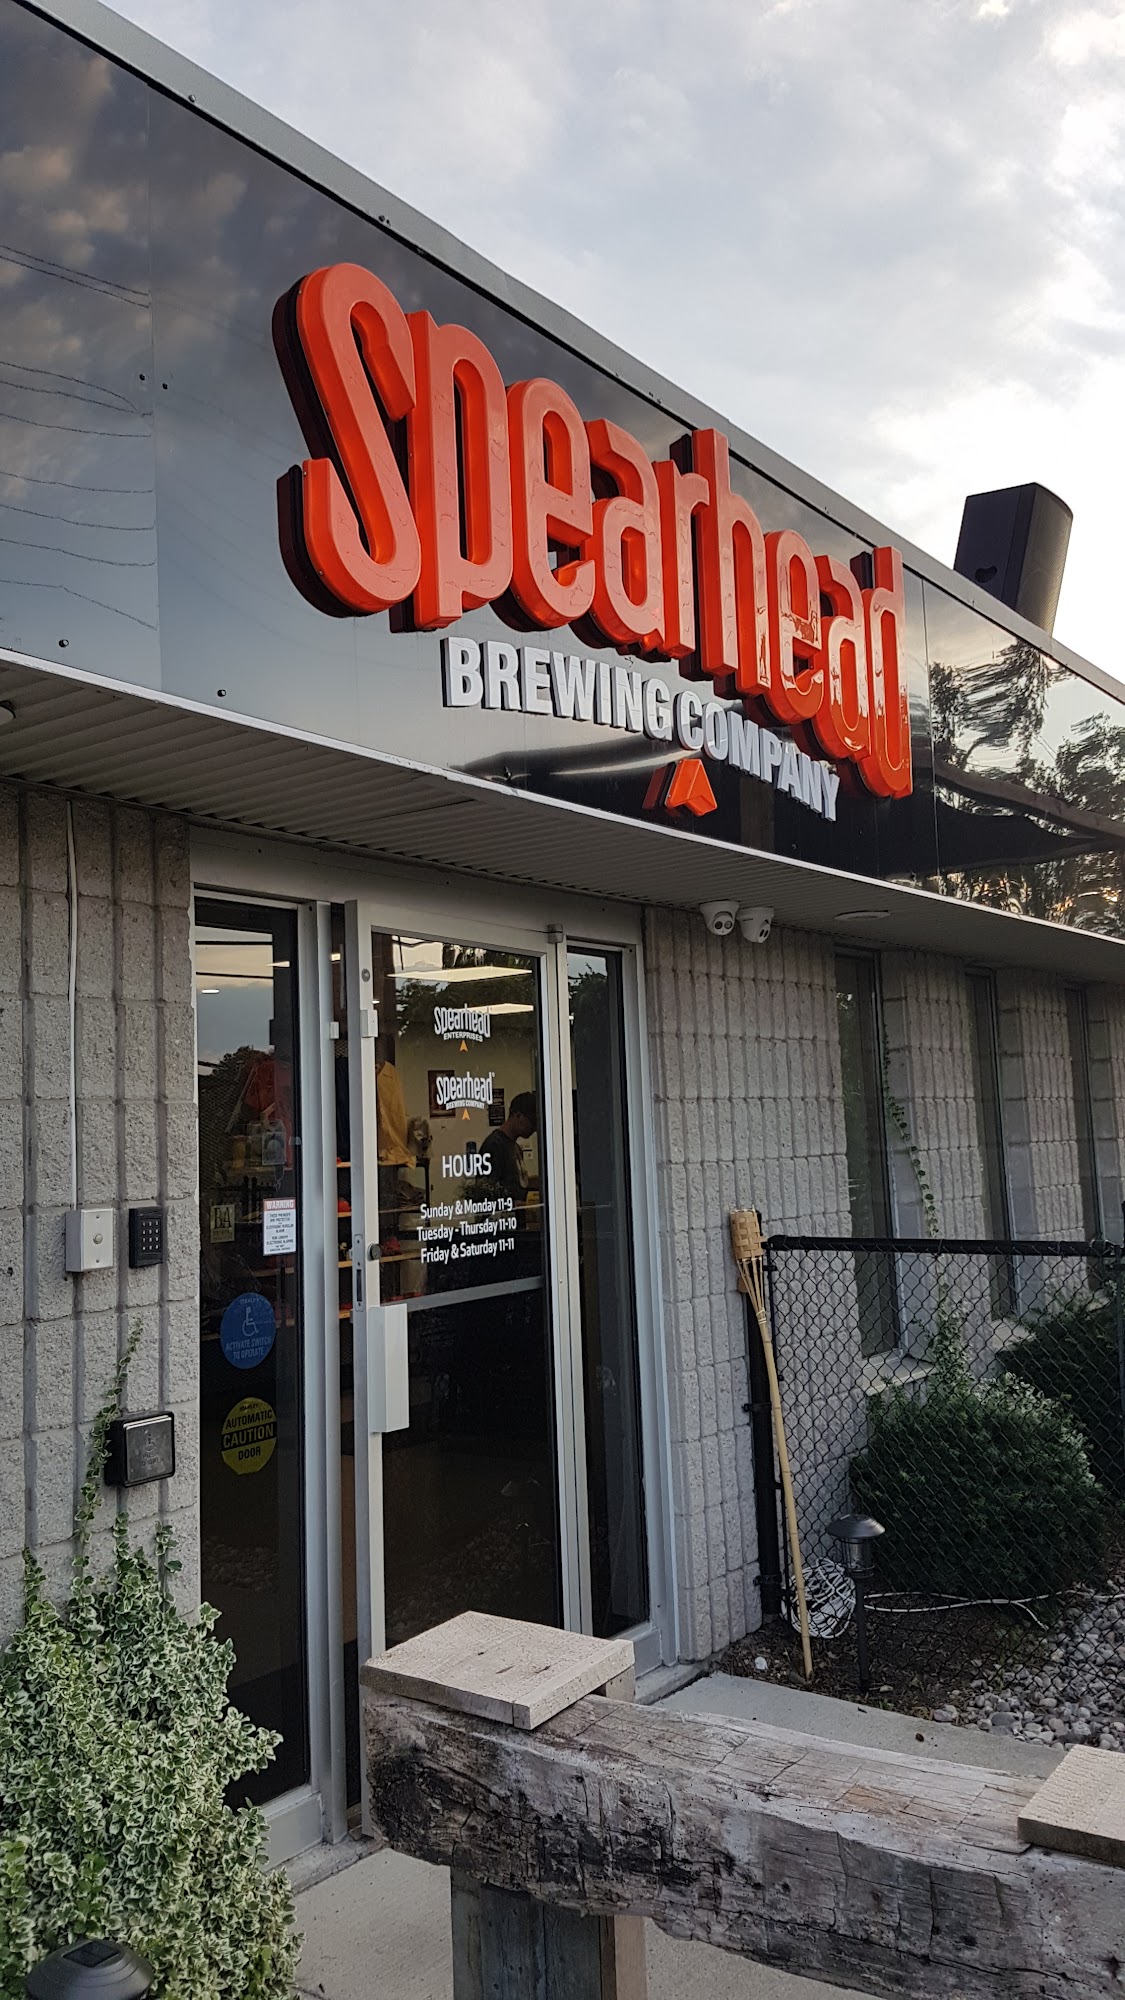 Spearhead Brewing Company